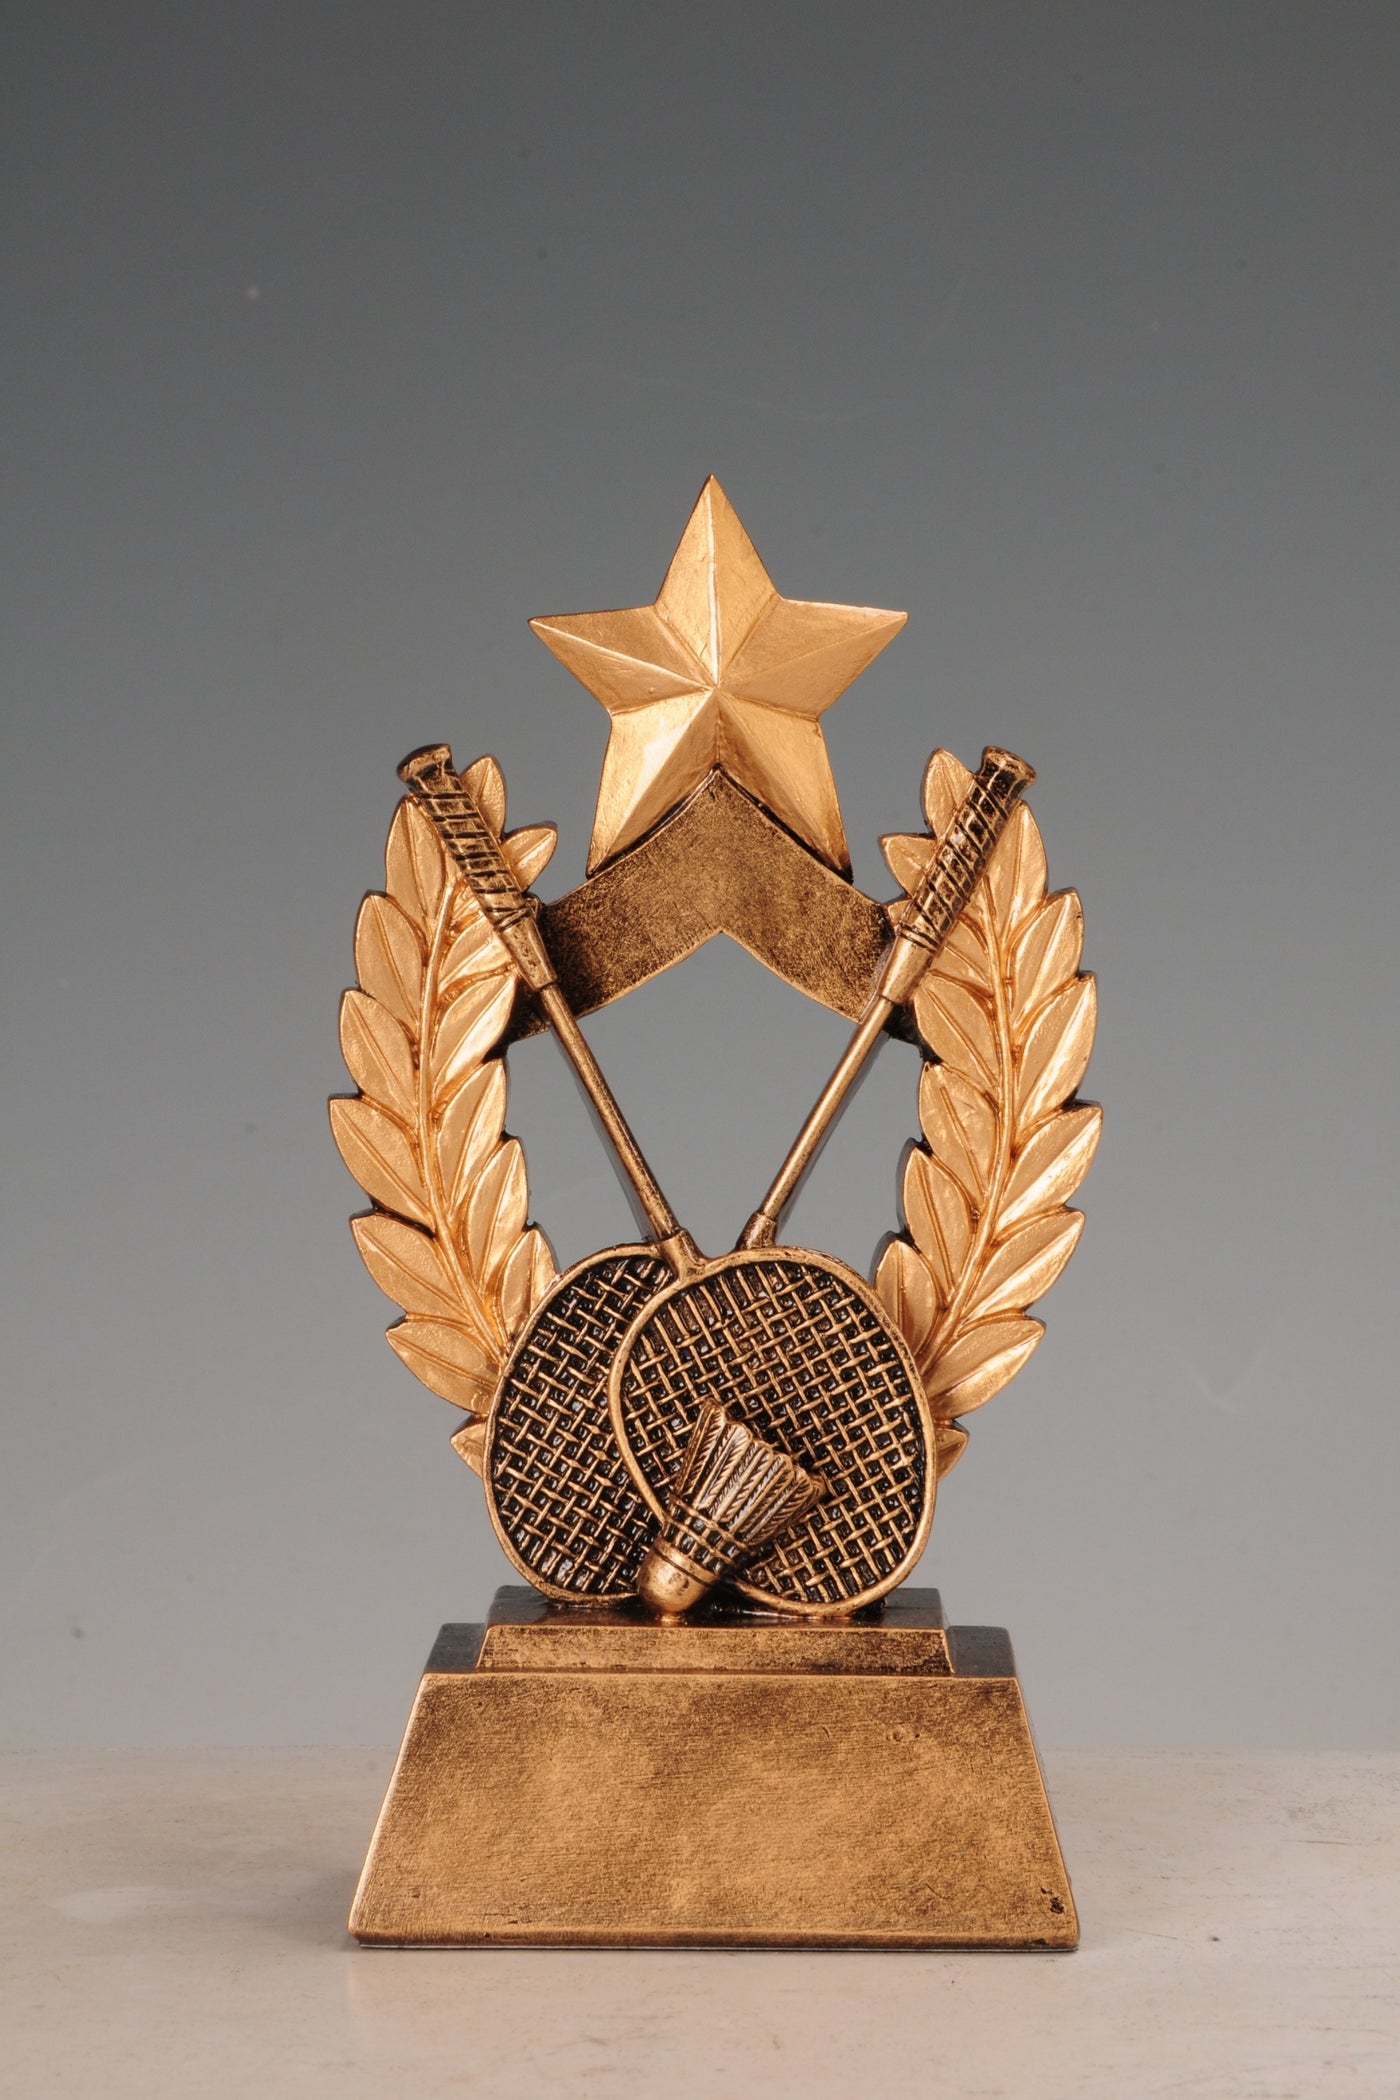 Badminton on one star sculpture for your home or office decor